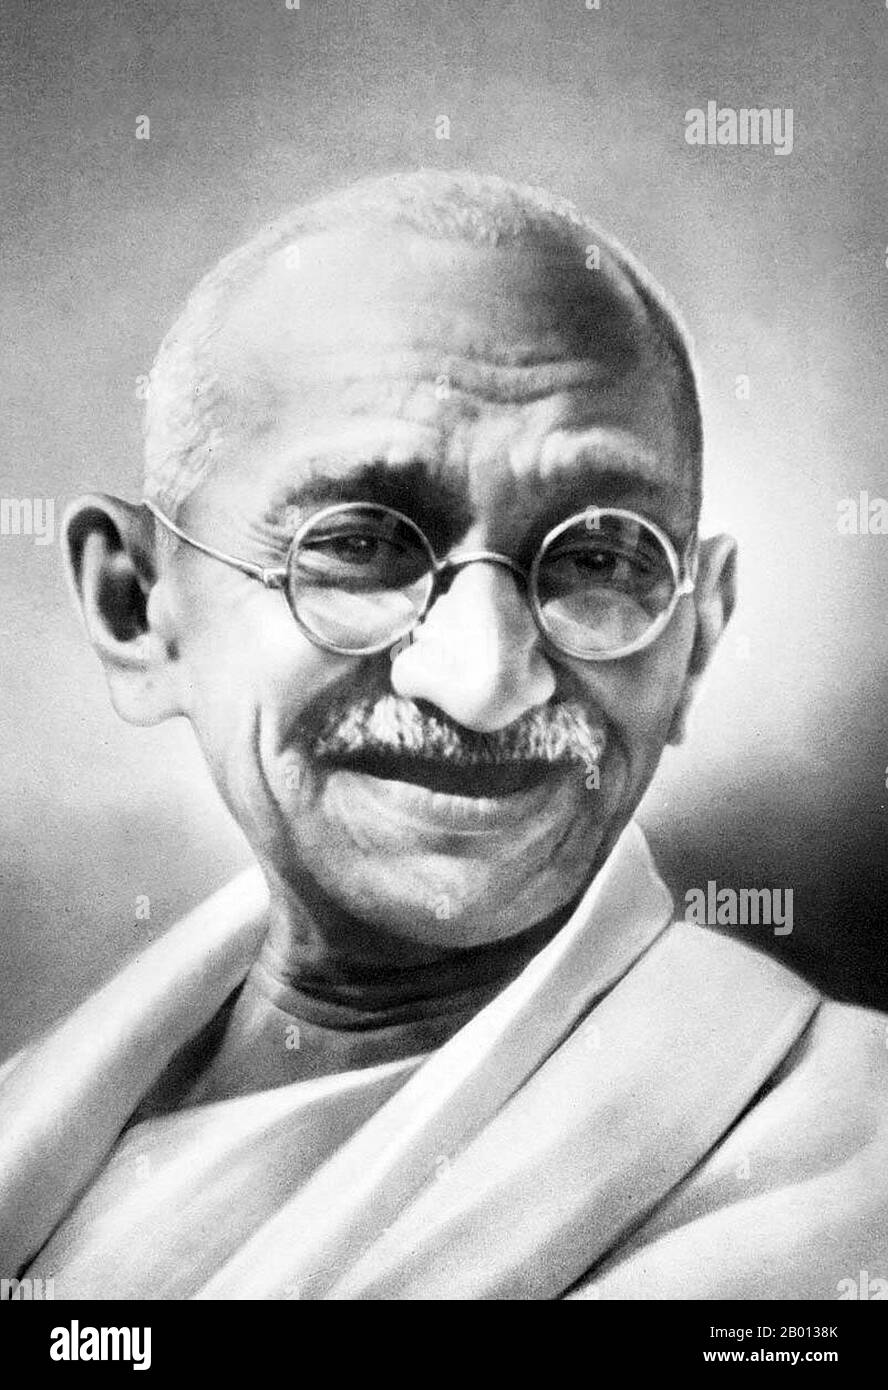 India: Mohandas Karamchand Gandhi (2 October 1869 – 30 January 1948), pre-eminent political and ideological leader of India's independence movement.  Mahatma Gandhi (1869-1948) was the pre-eminent political and ideological leader of India during the Indian independence movement. He pioneered satyagraha. This is defined as resistance to tyranny through mass civil disobedience, a philosophy firmly founded upon ahimsa, or total non-violence. This concept helped India gain independence and inspired movements for civil rights and freedom across the world. Stock Photo